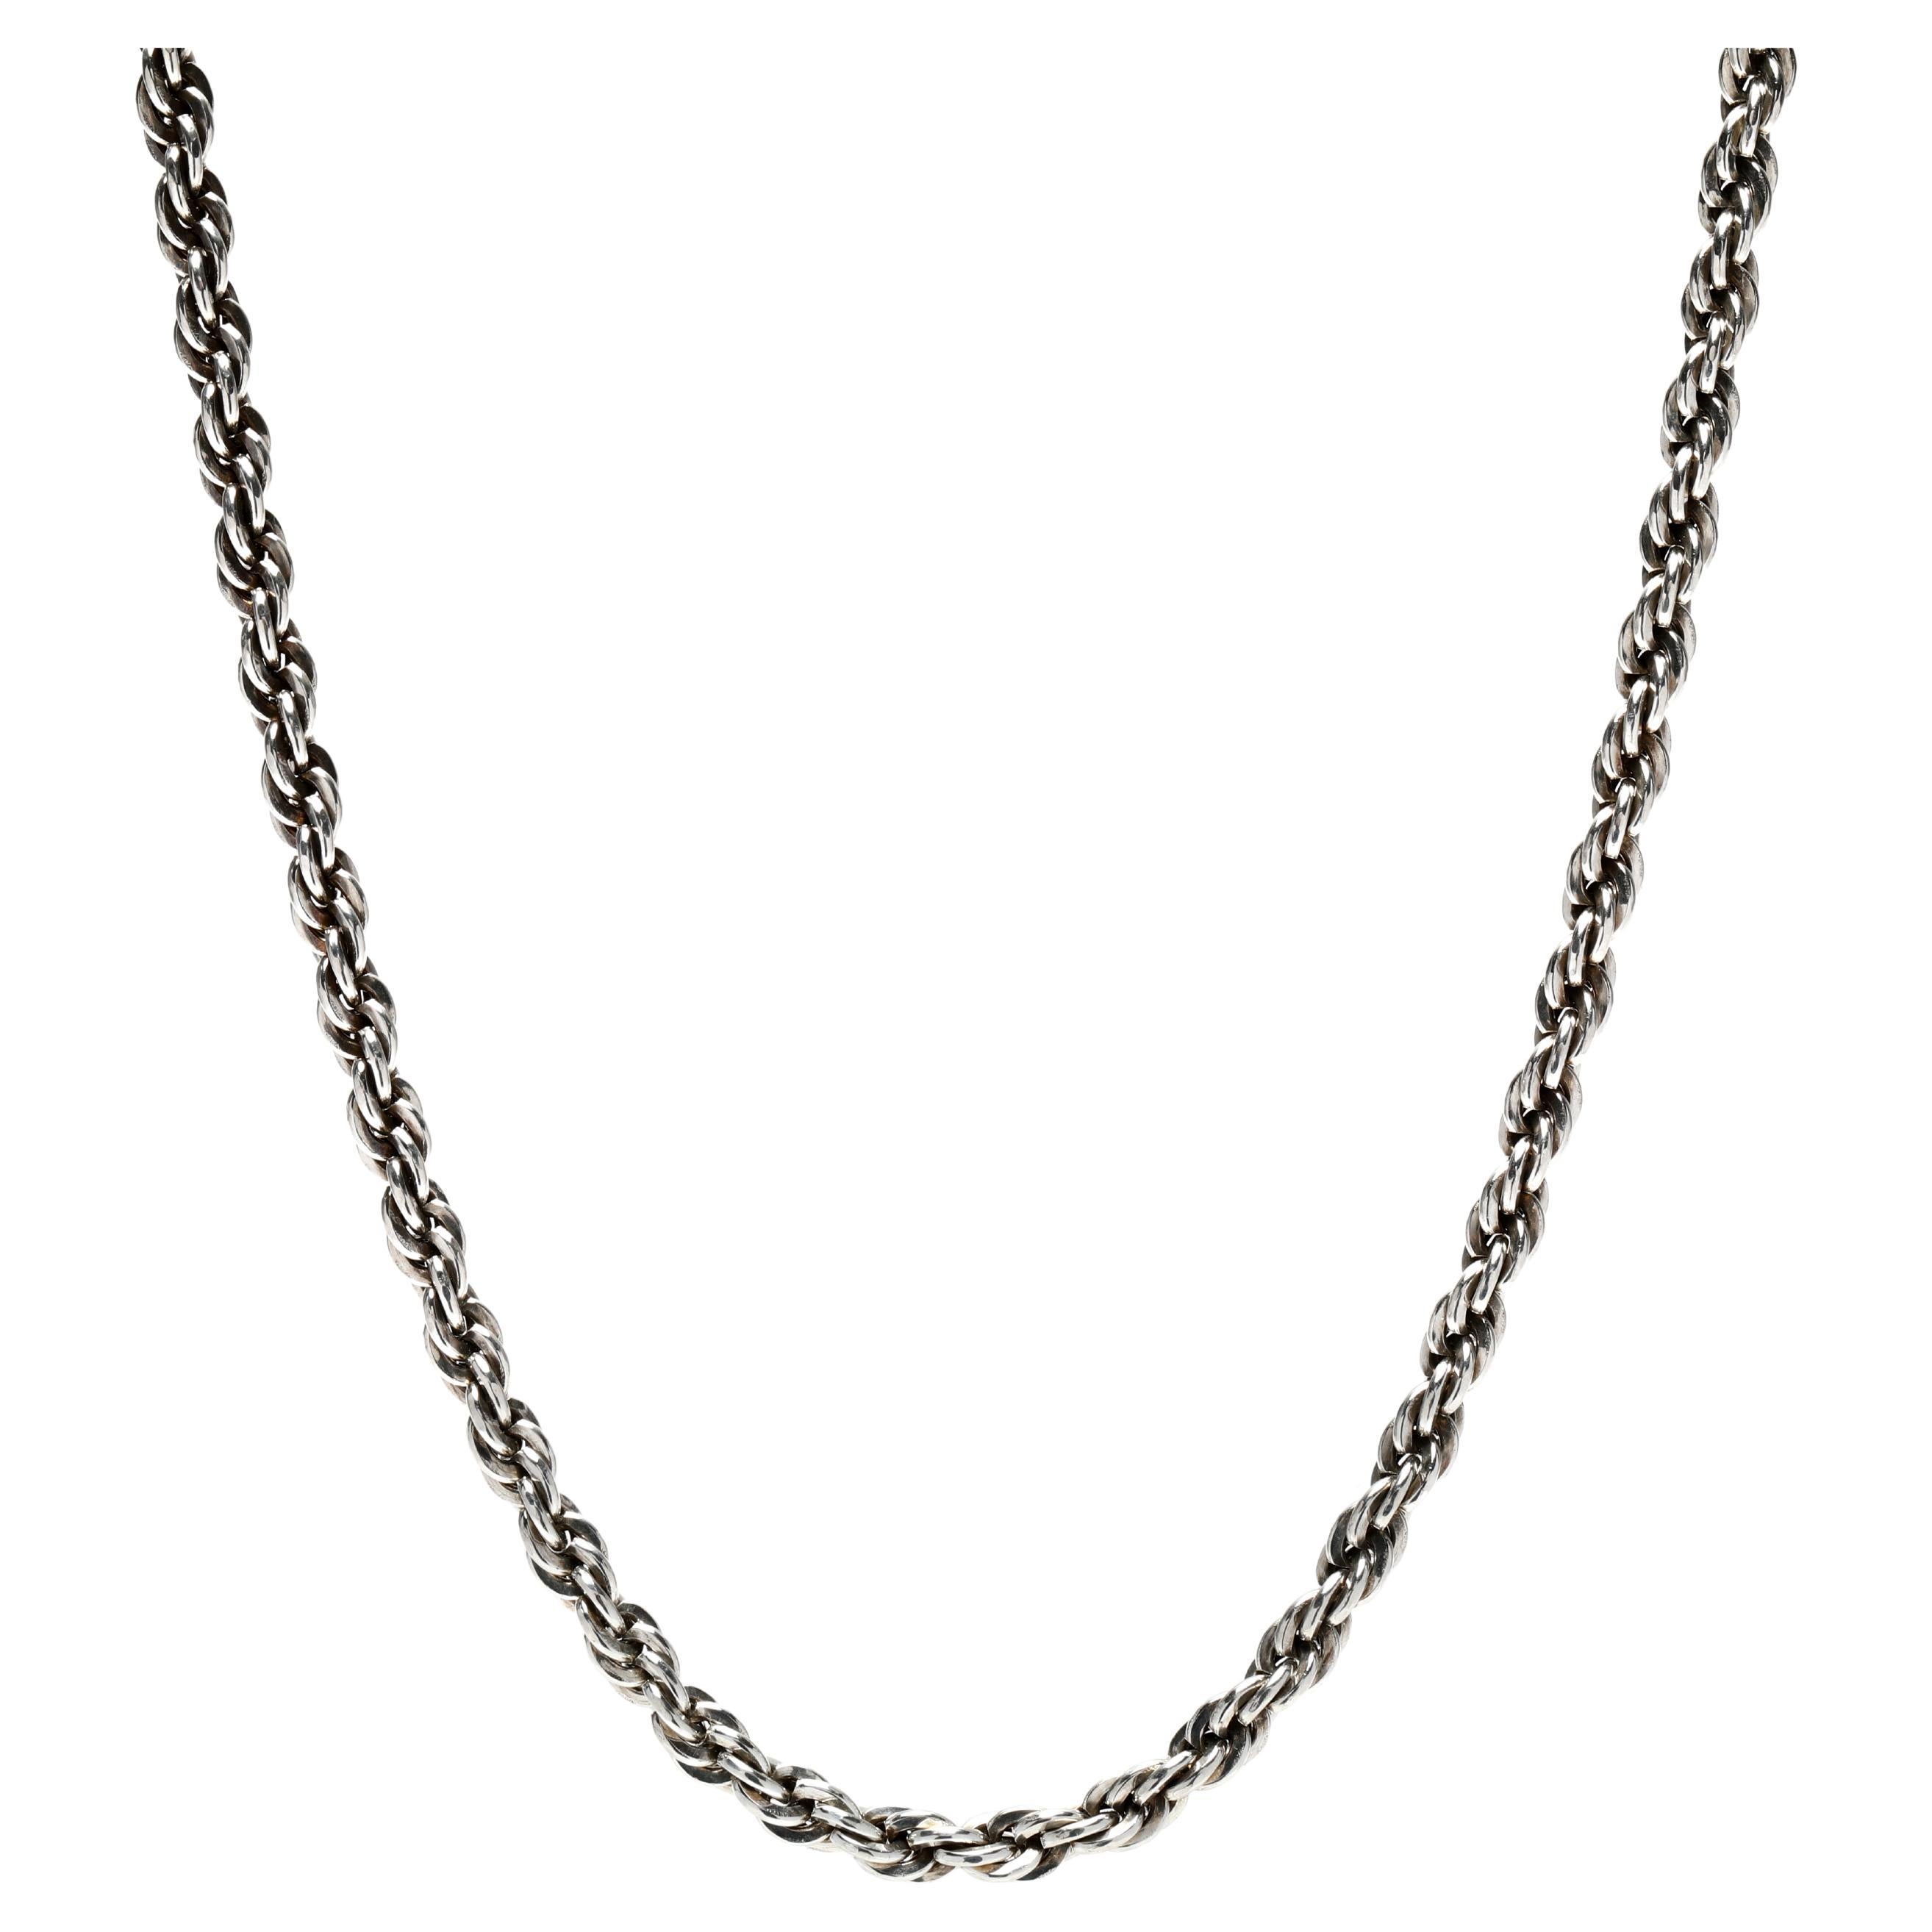 Vintage Rope Chain Necklace, Sterling Silver, Medium Rope